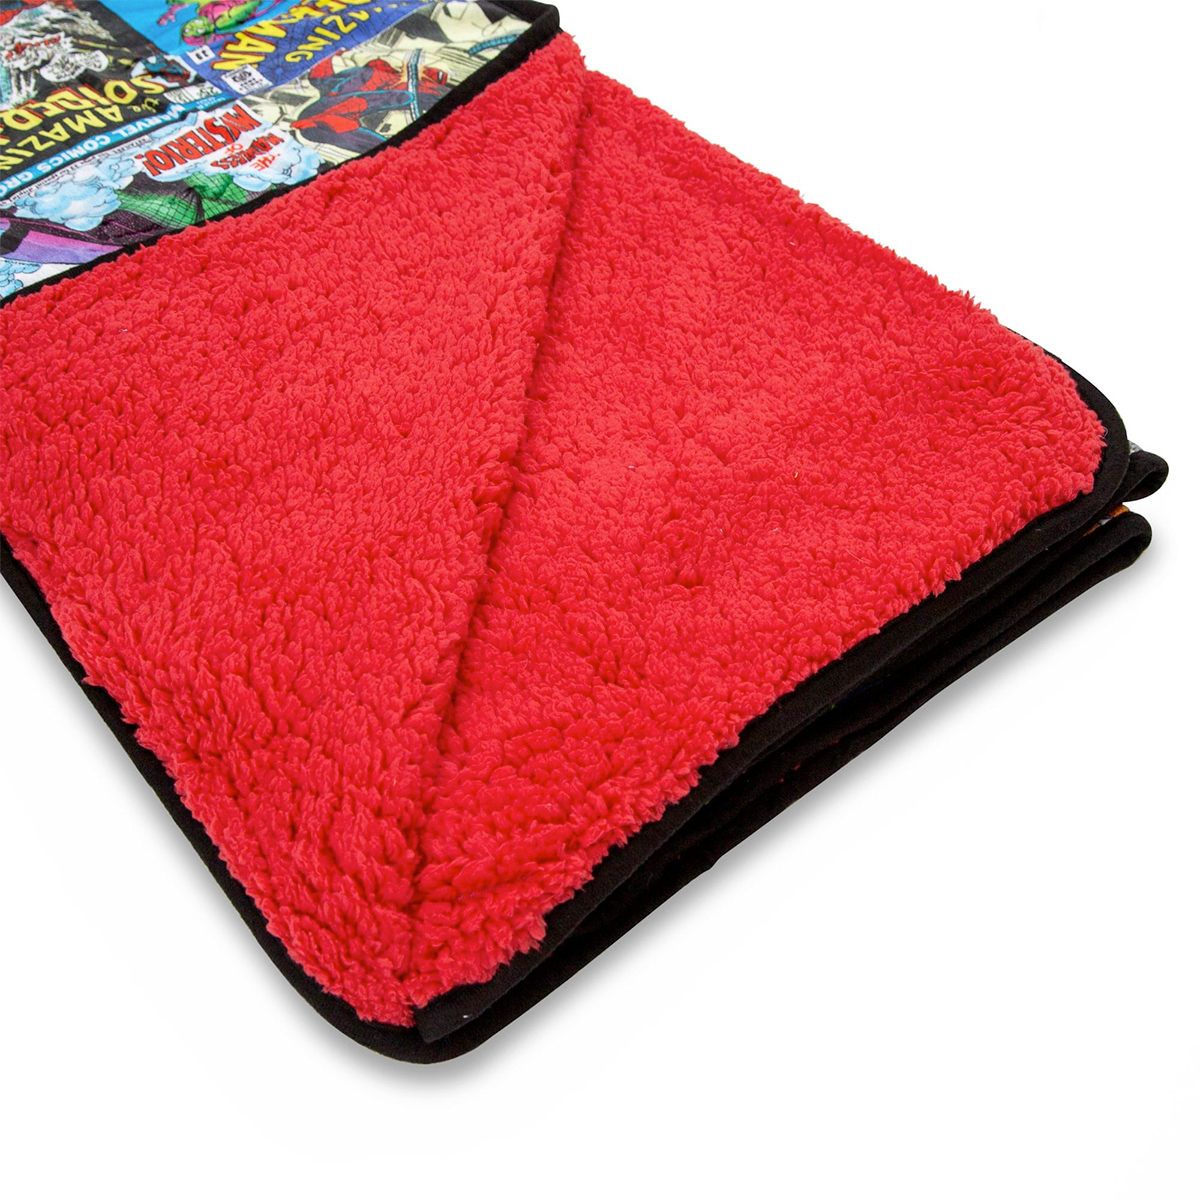 Spider-Man 60th Anniversary Special Edition Red Sherpa Throw Blanket